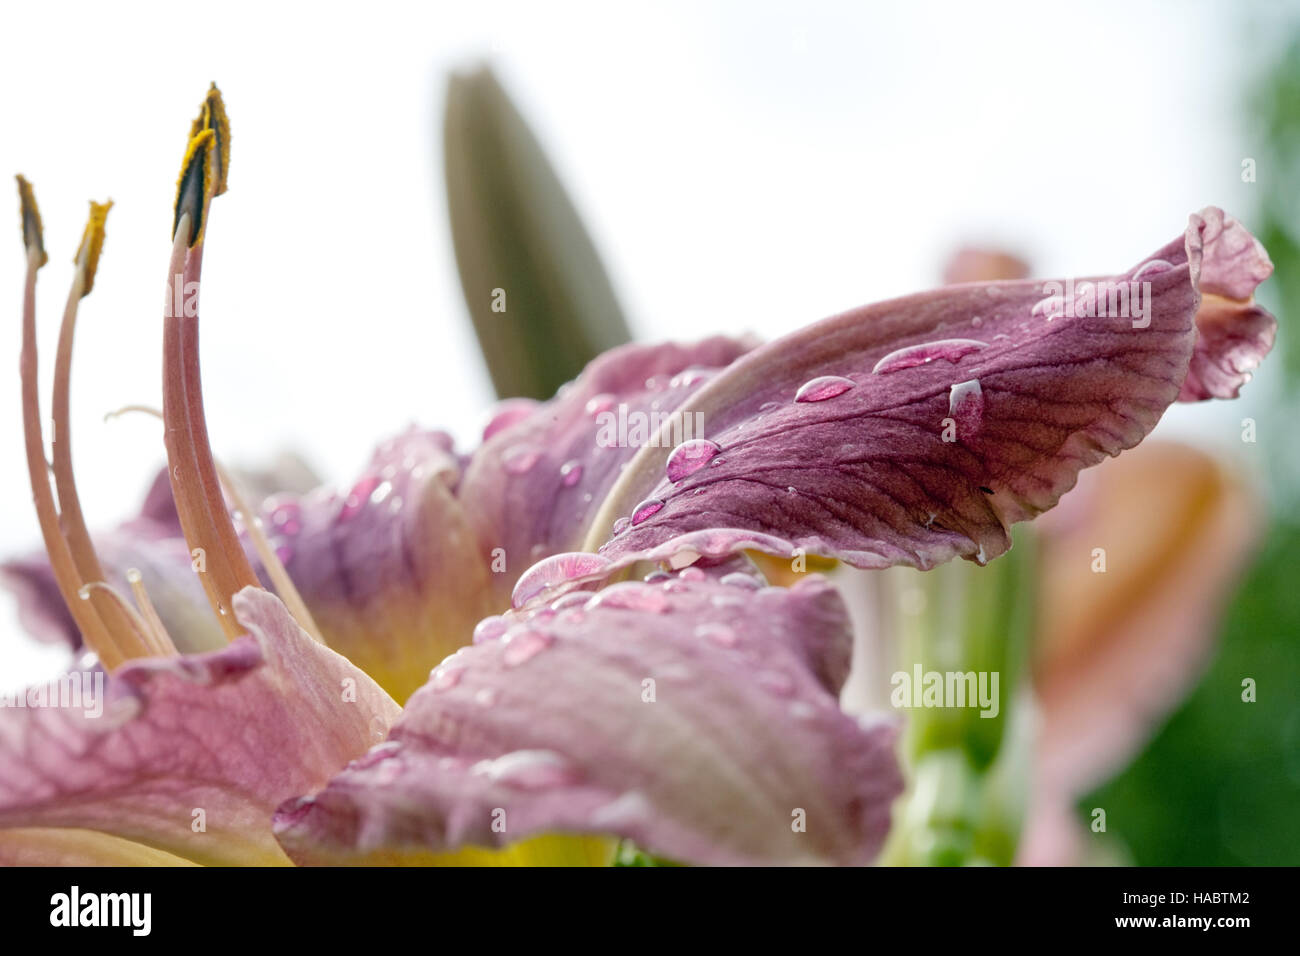 fading lily flower closeup view with petal, stamen and pistil Stock Photo